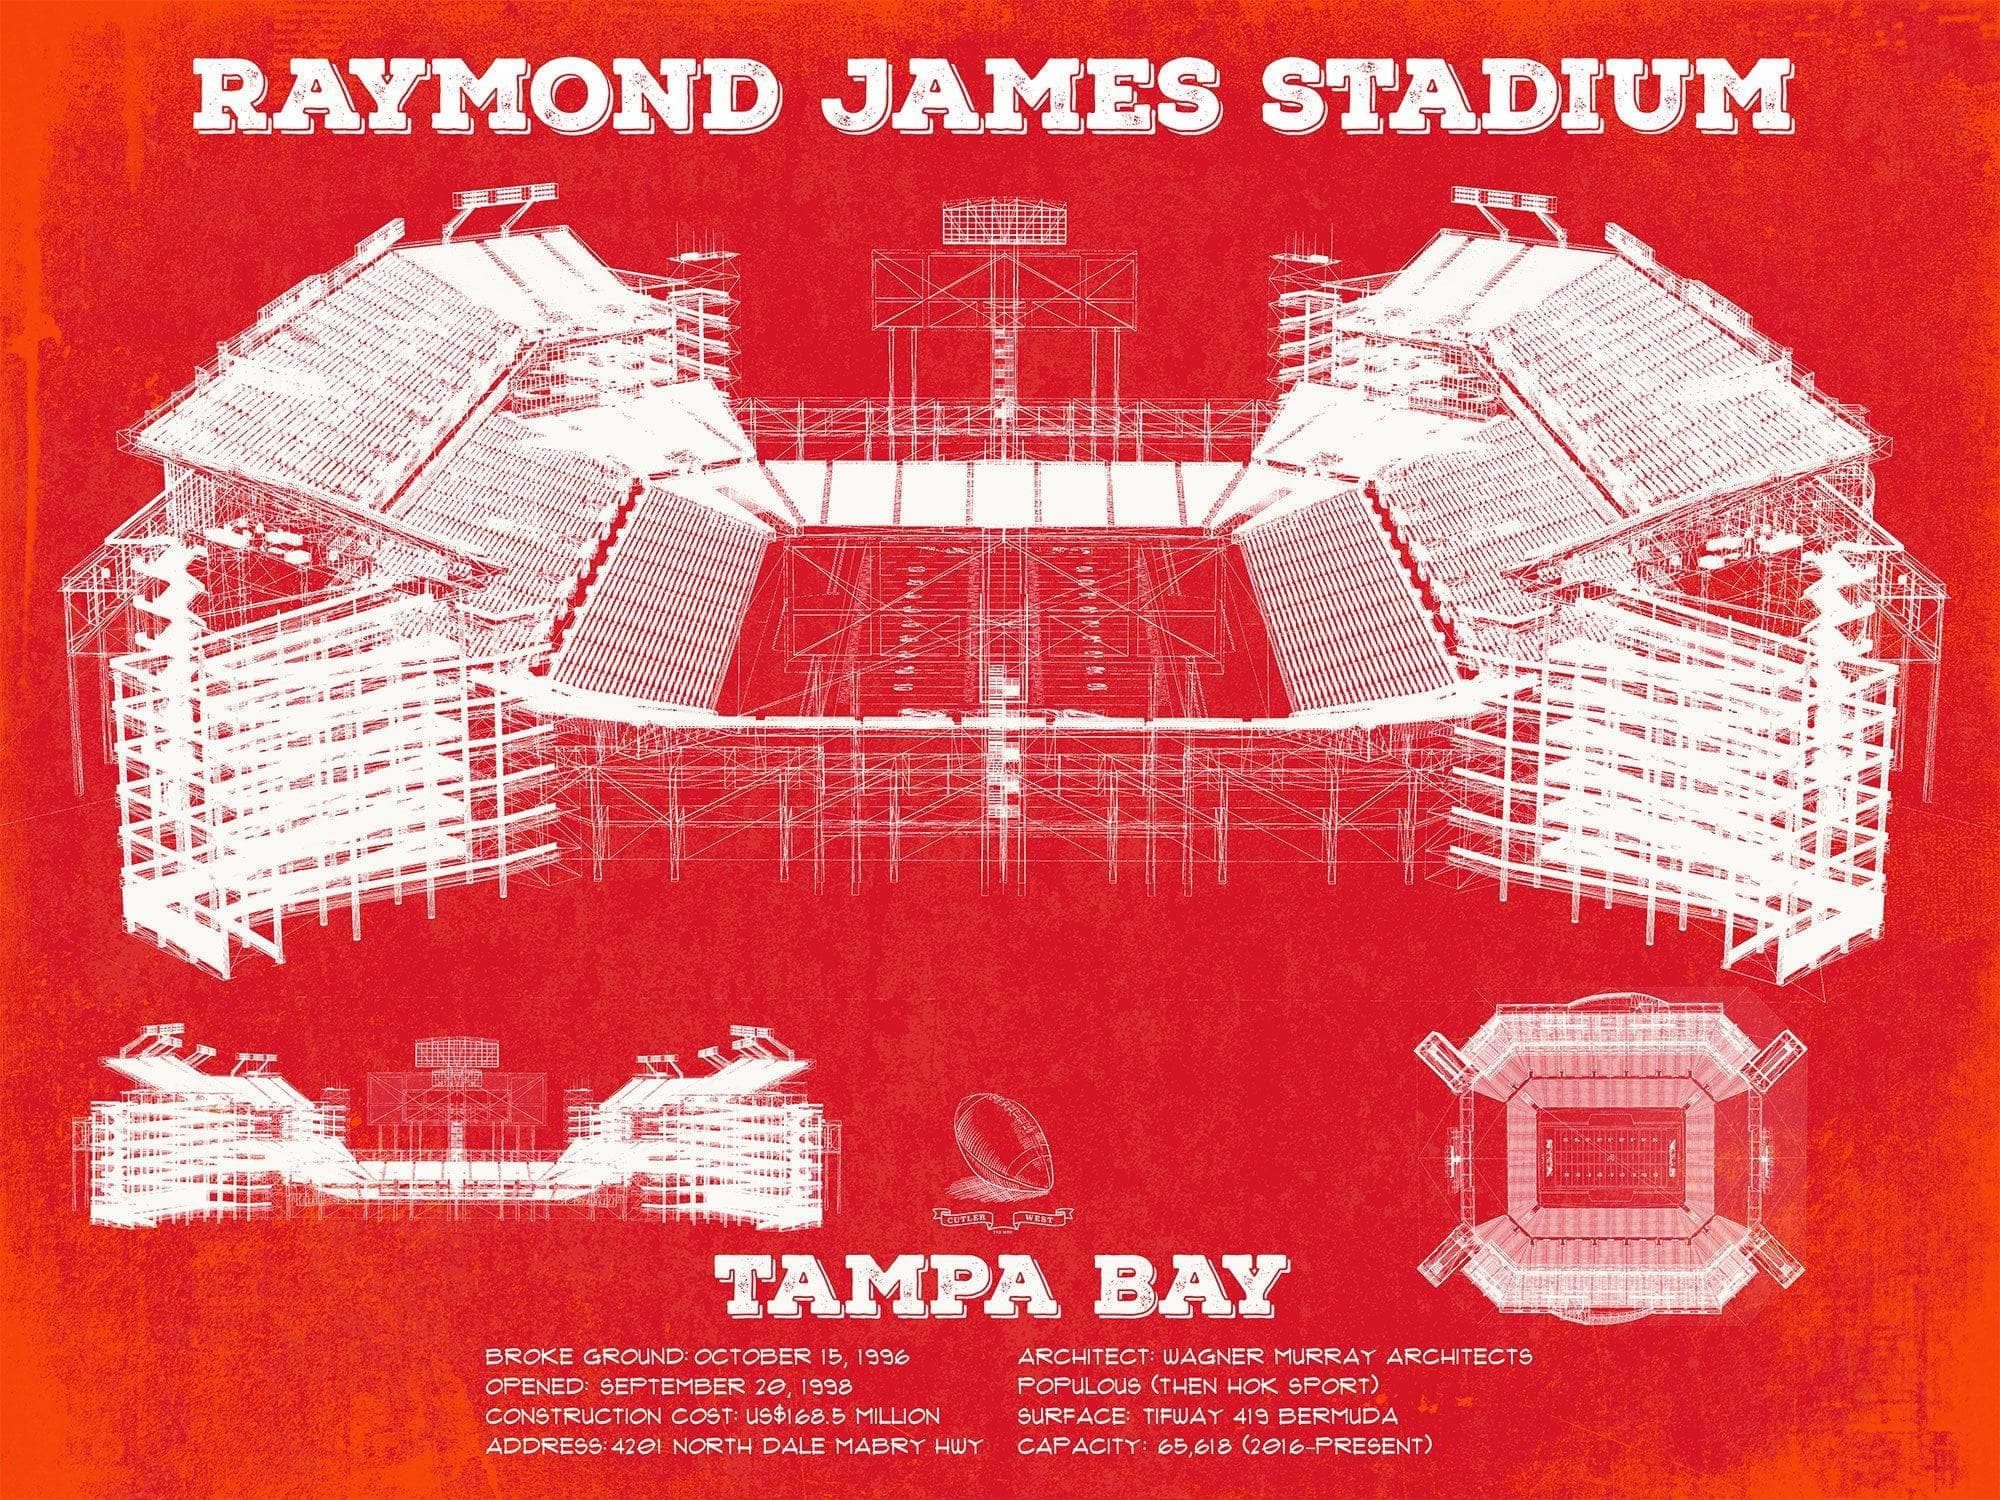 Cutler West Pro Football Collection Vintage Tampa Bay Buccaneers Team Color - Raymond James Stadium Print